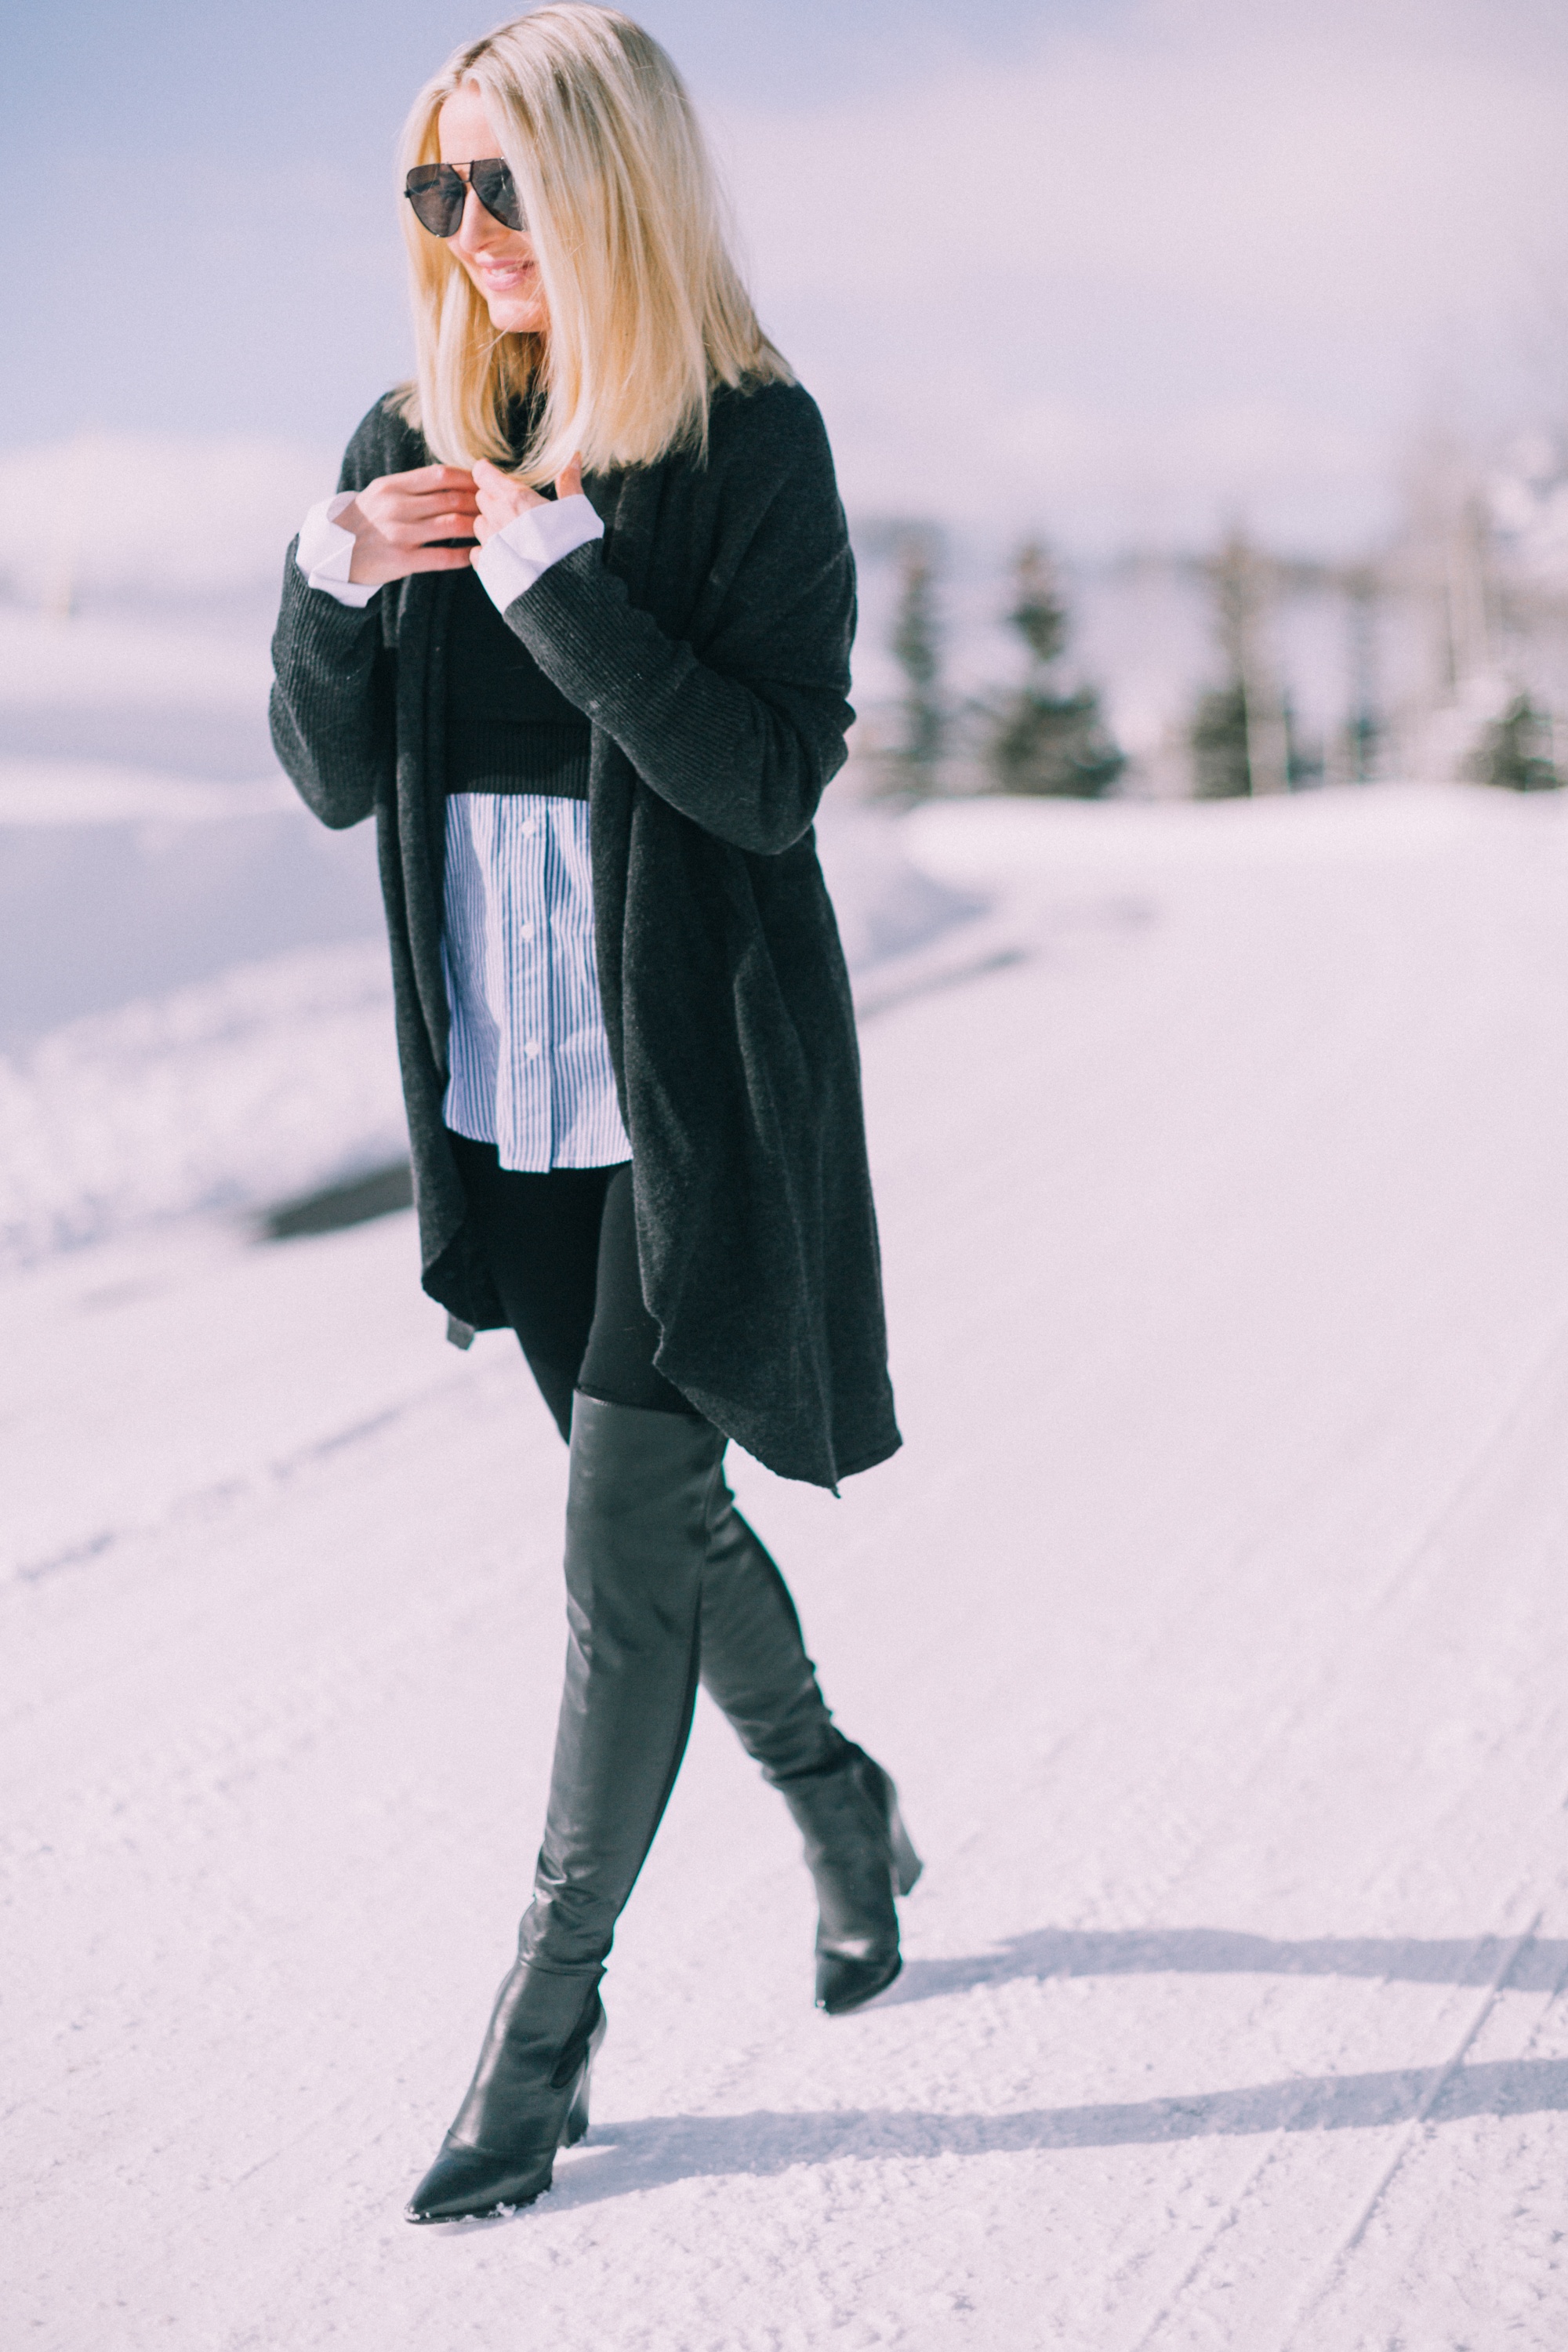 blond fashion blogger over 40 showing how to wear black Spanx leggings in an outfit with Sam Edelman Valda over the knee boots and Barefoot Dreams cardigan in the snow